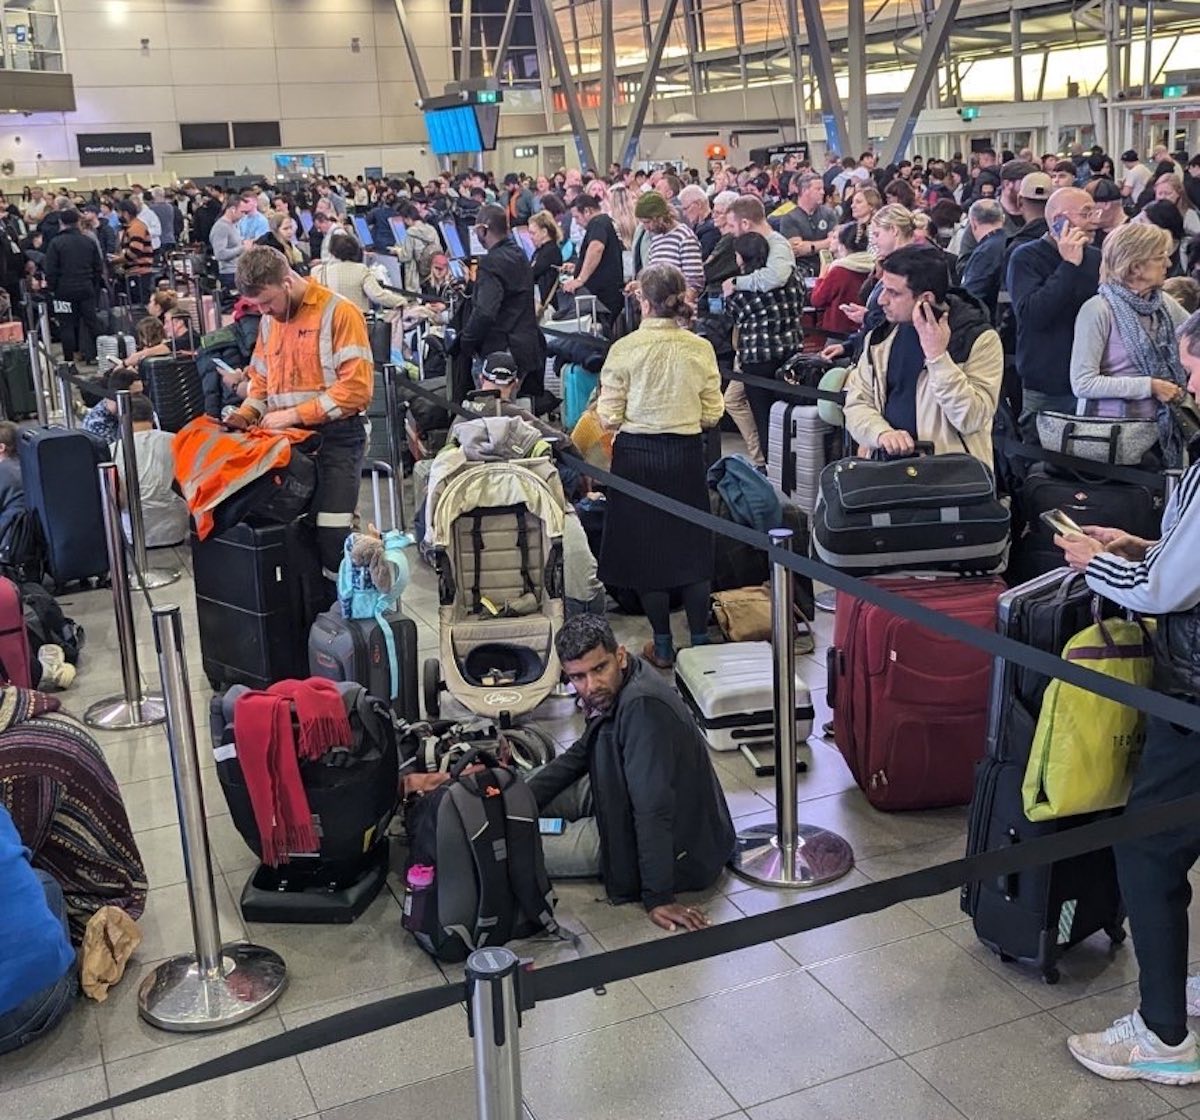 a large crowd of people in an airport